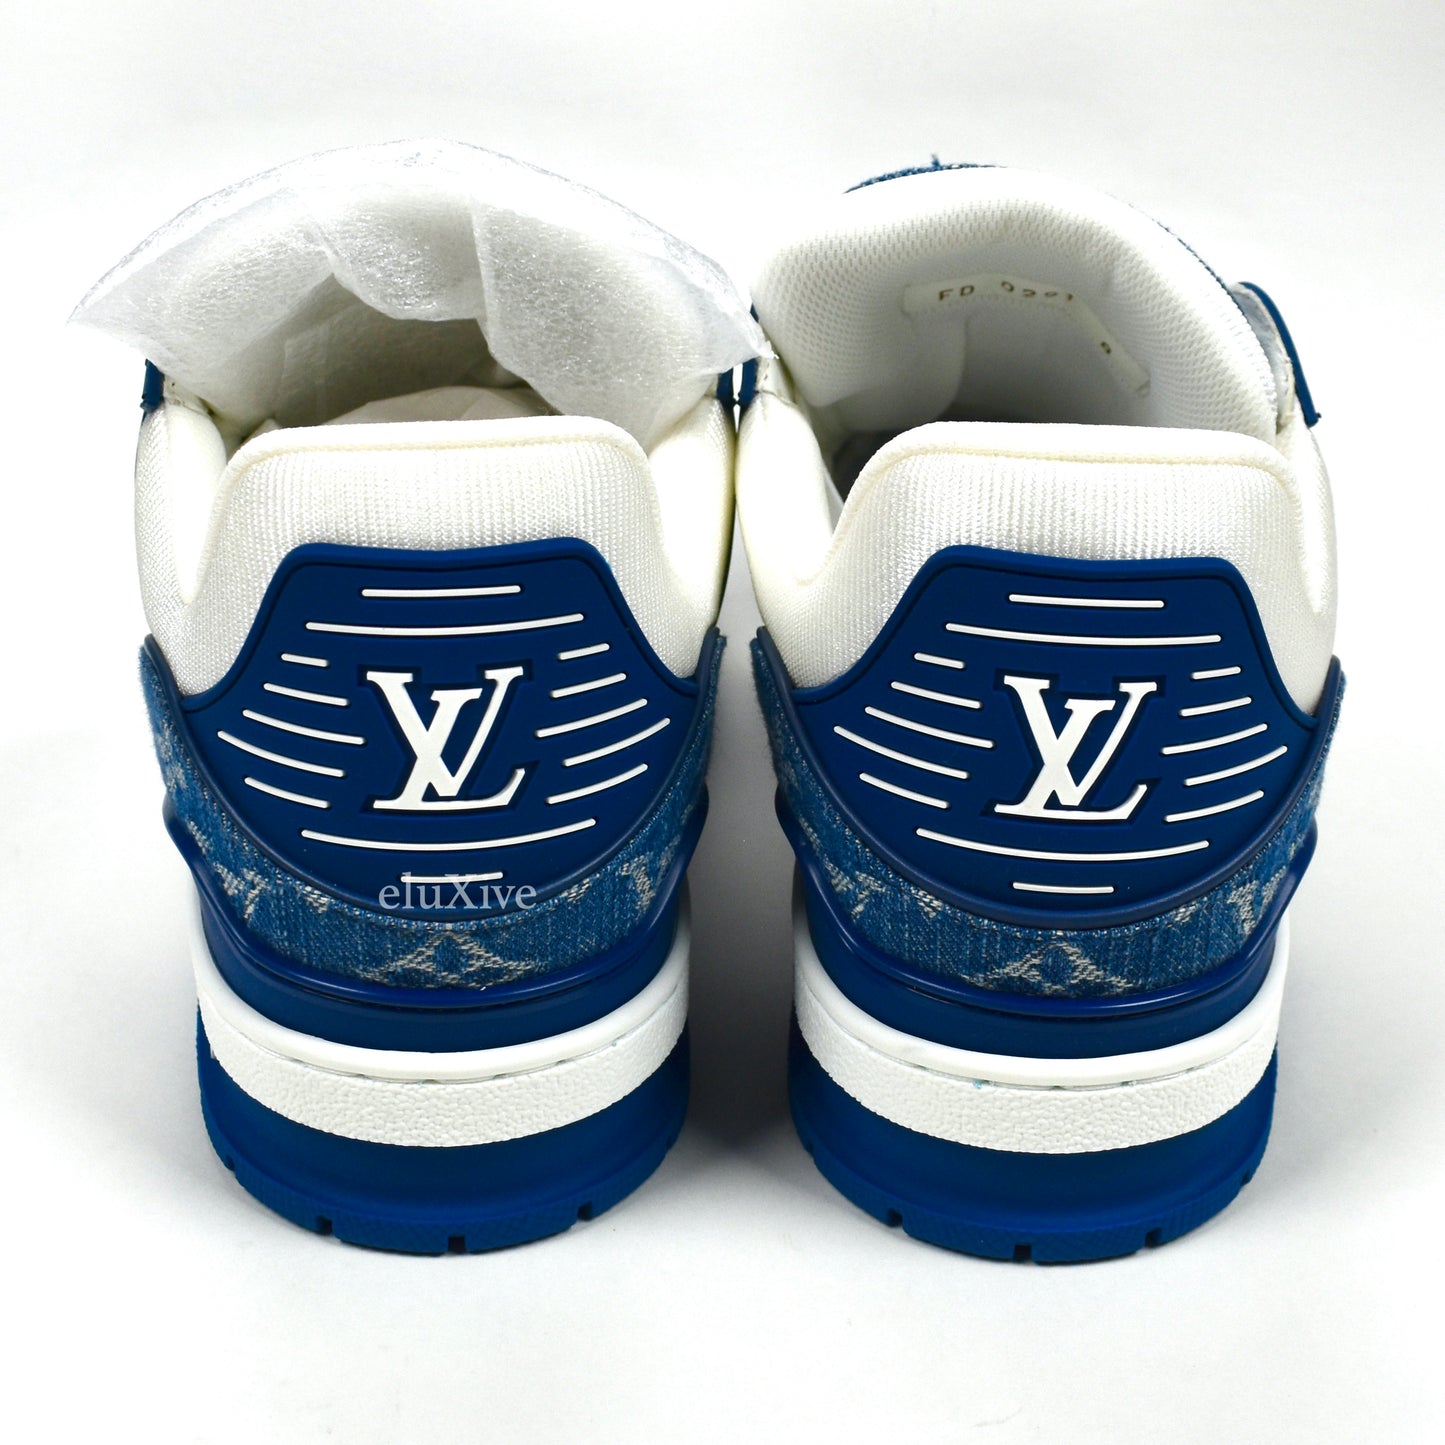 Louis Vuitton - White/Navy Leather & Denim Trainer Sneakers